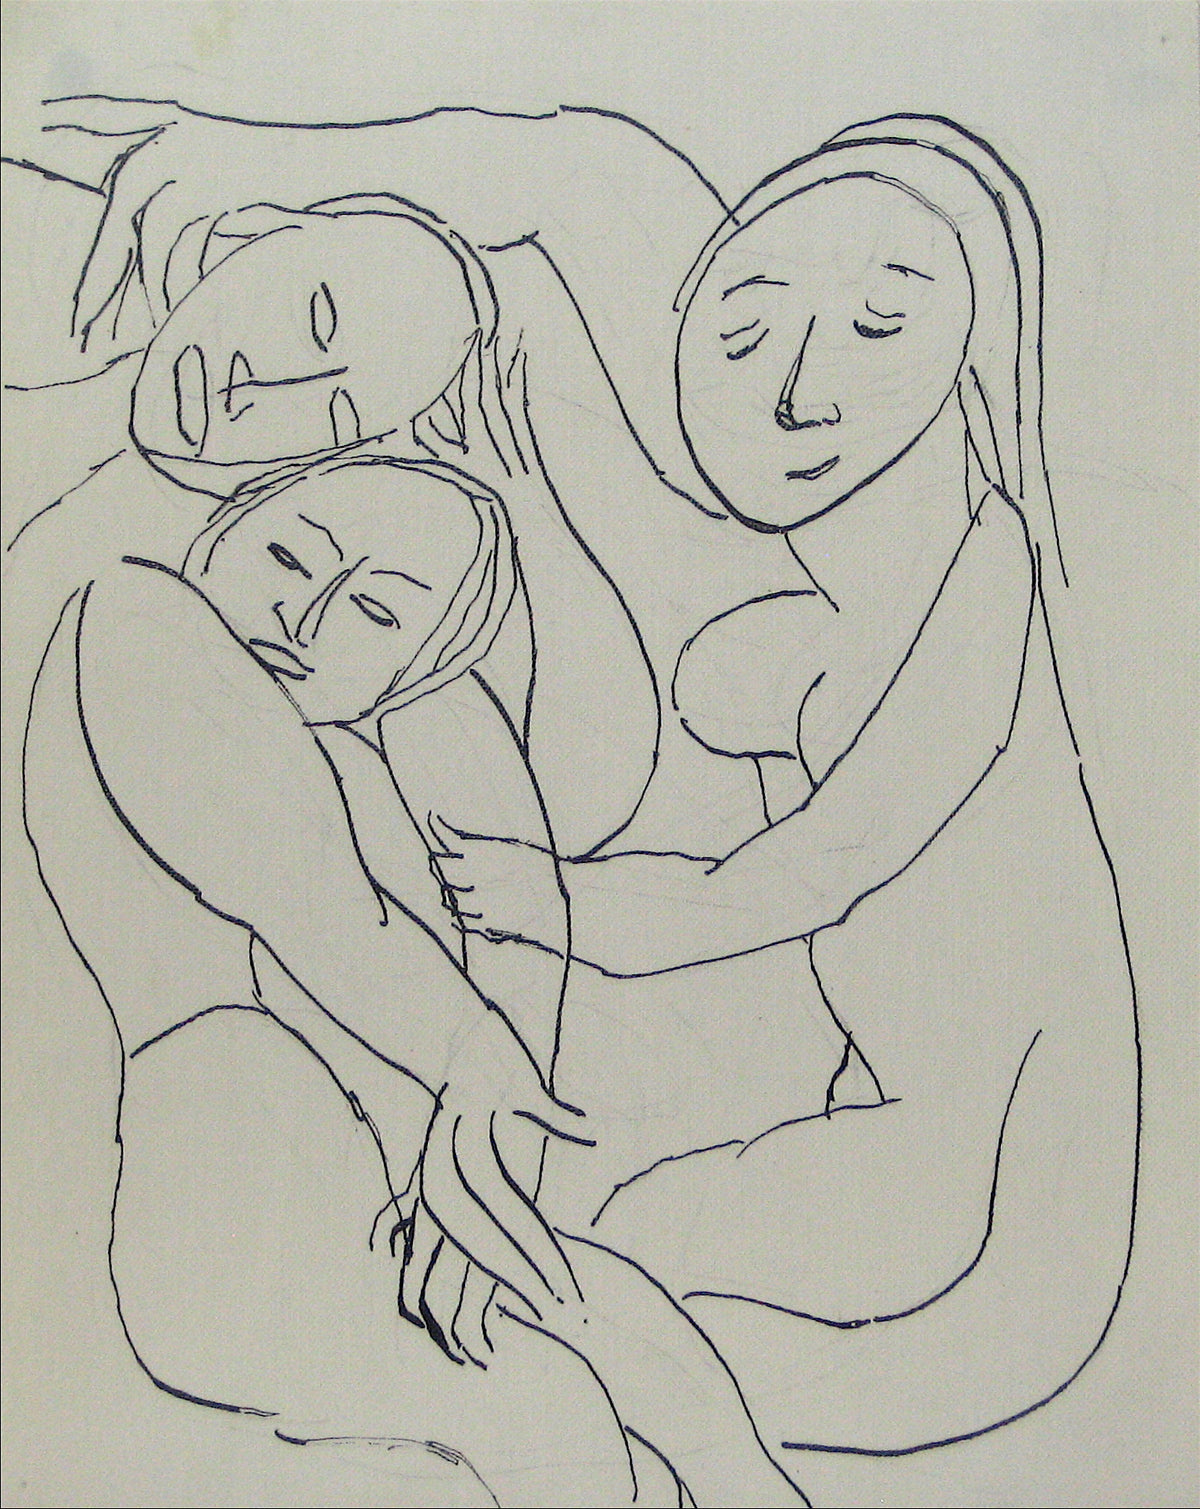 Abstracted Figures in a Scene &lt;br&gt;Early-Mid 20th Century Pen and Ink &lt;br&gt;&lt;br&gt;#13526